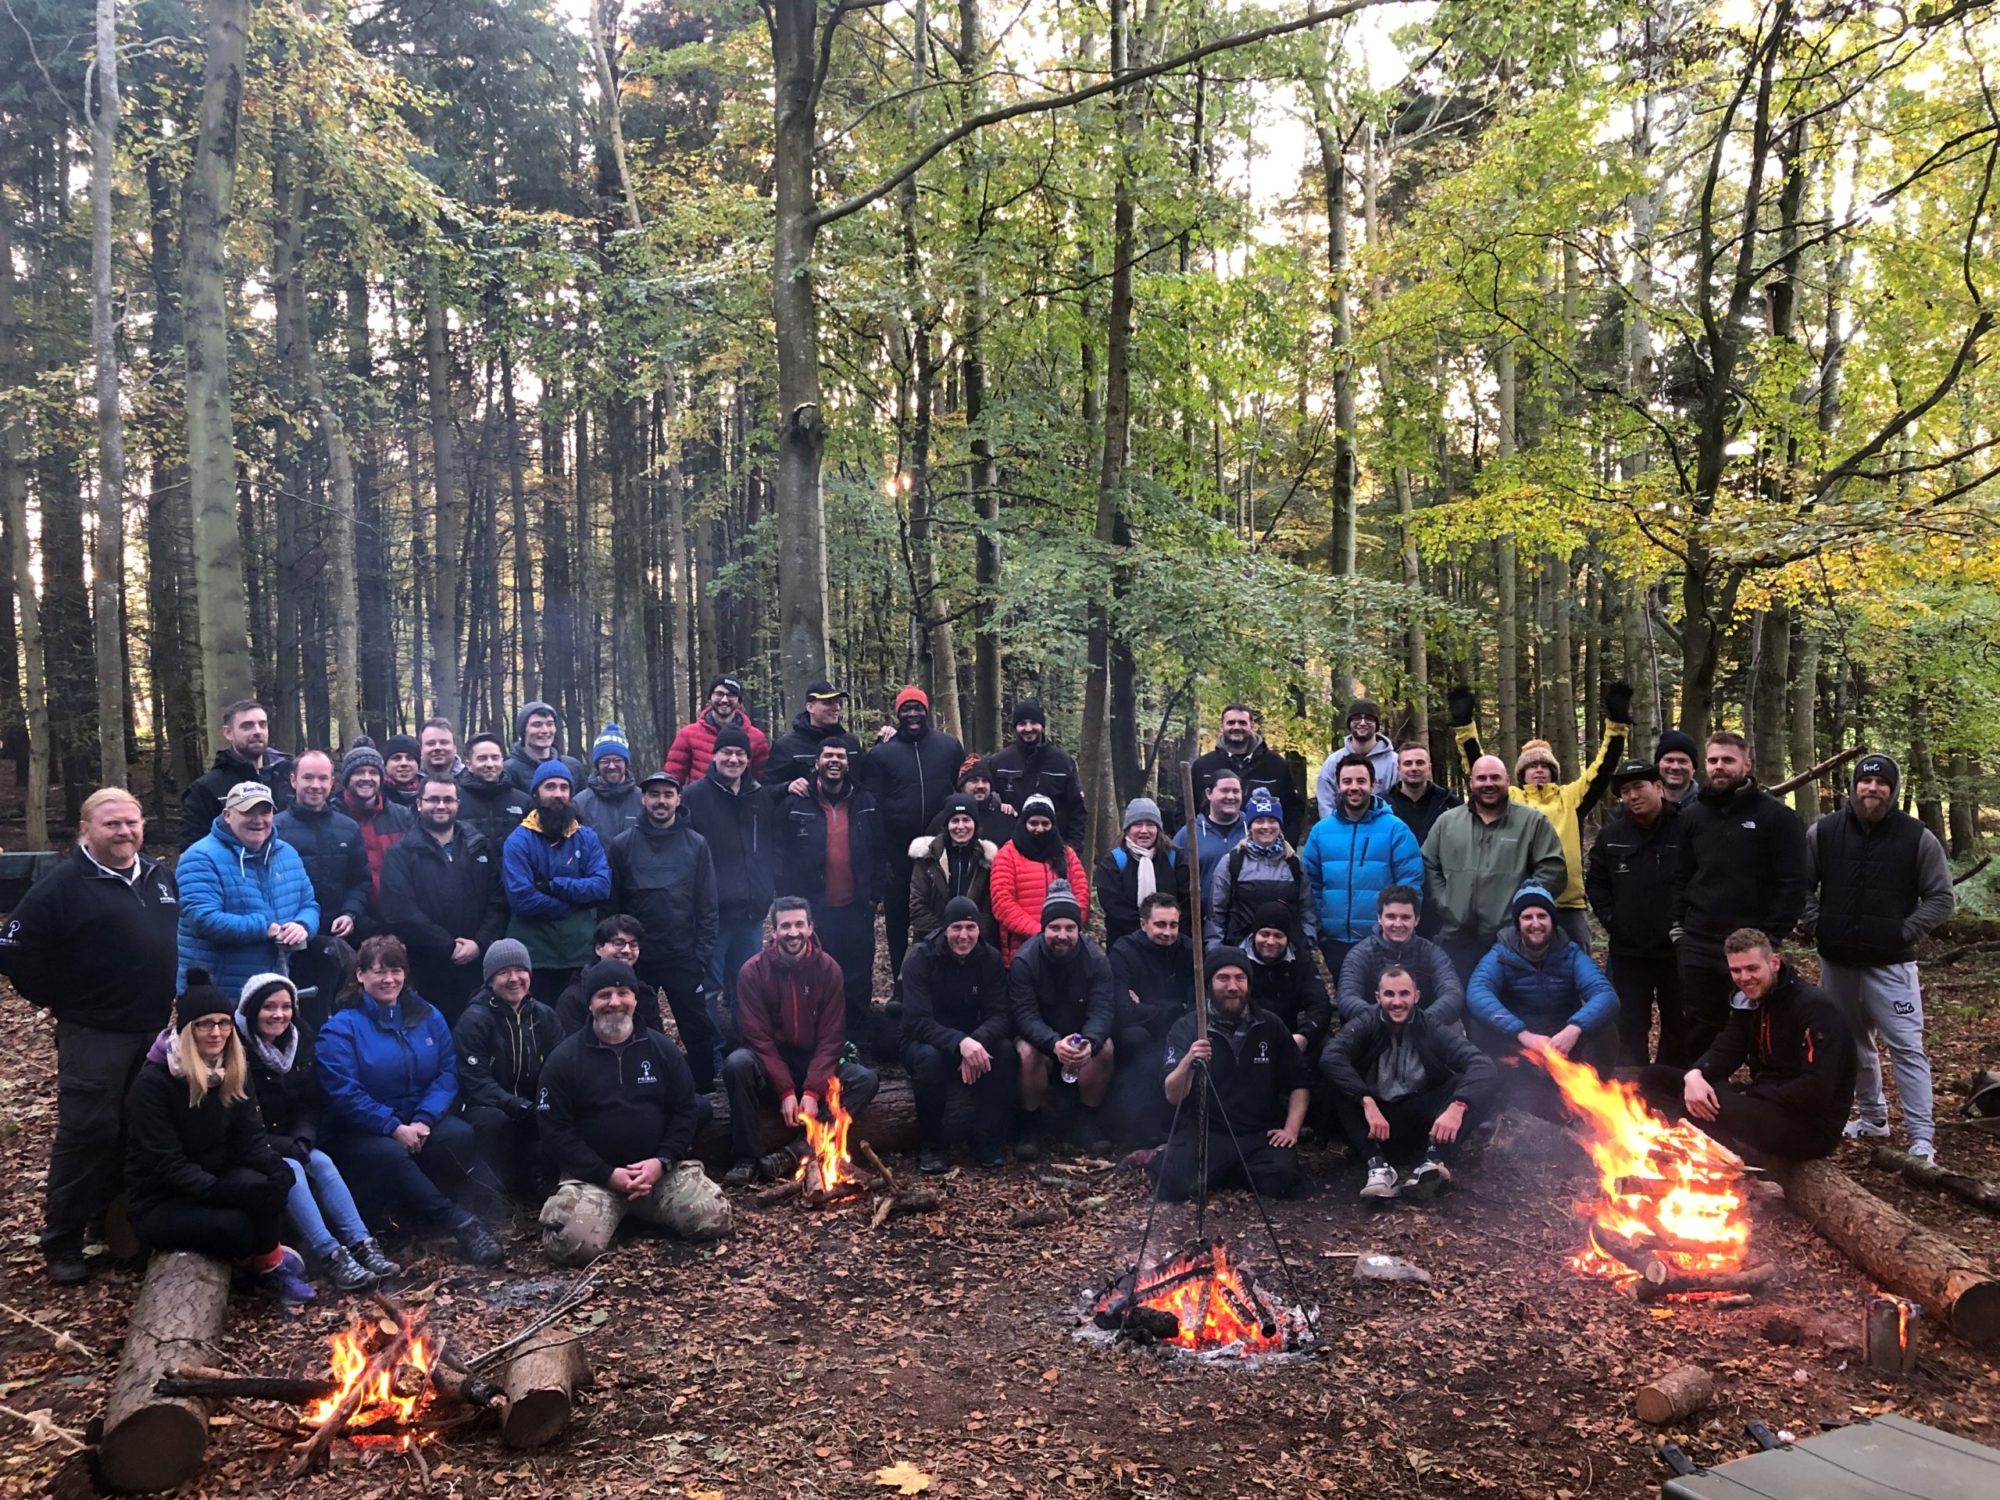 group photo in woods